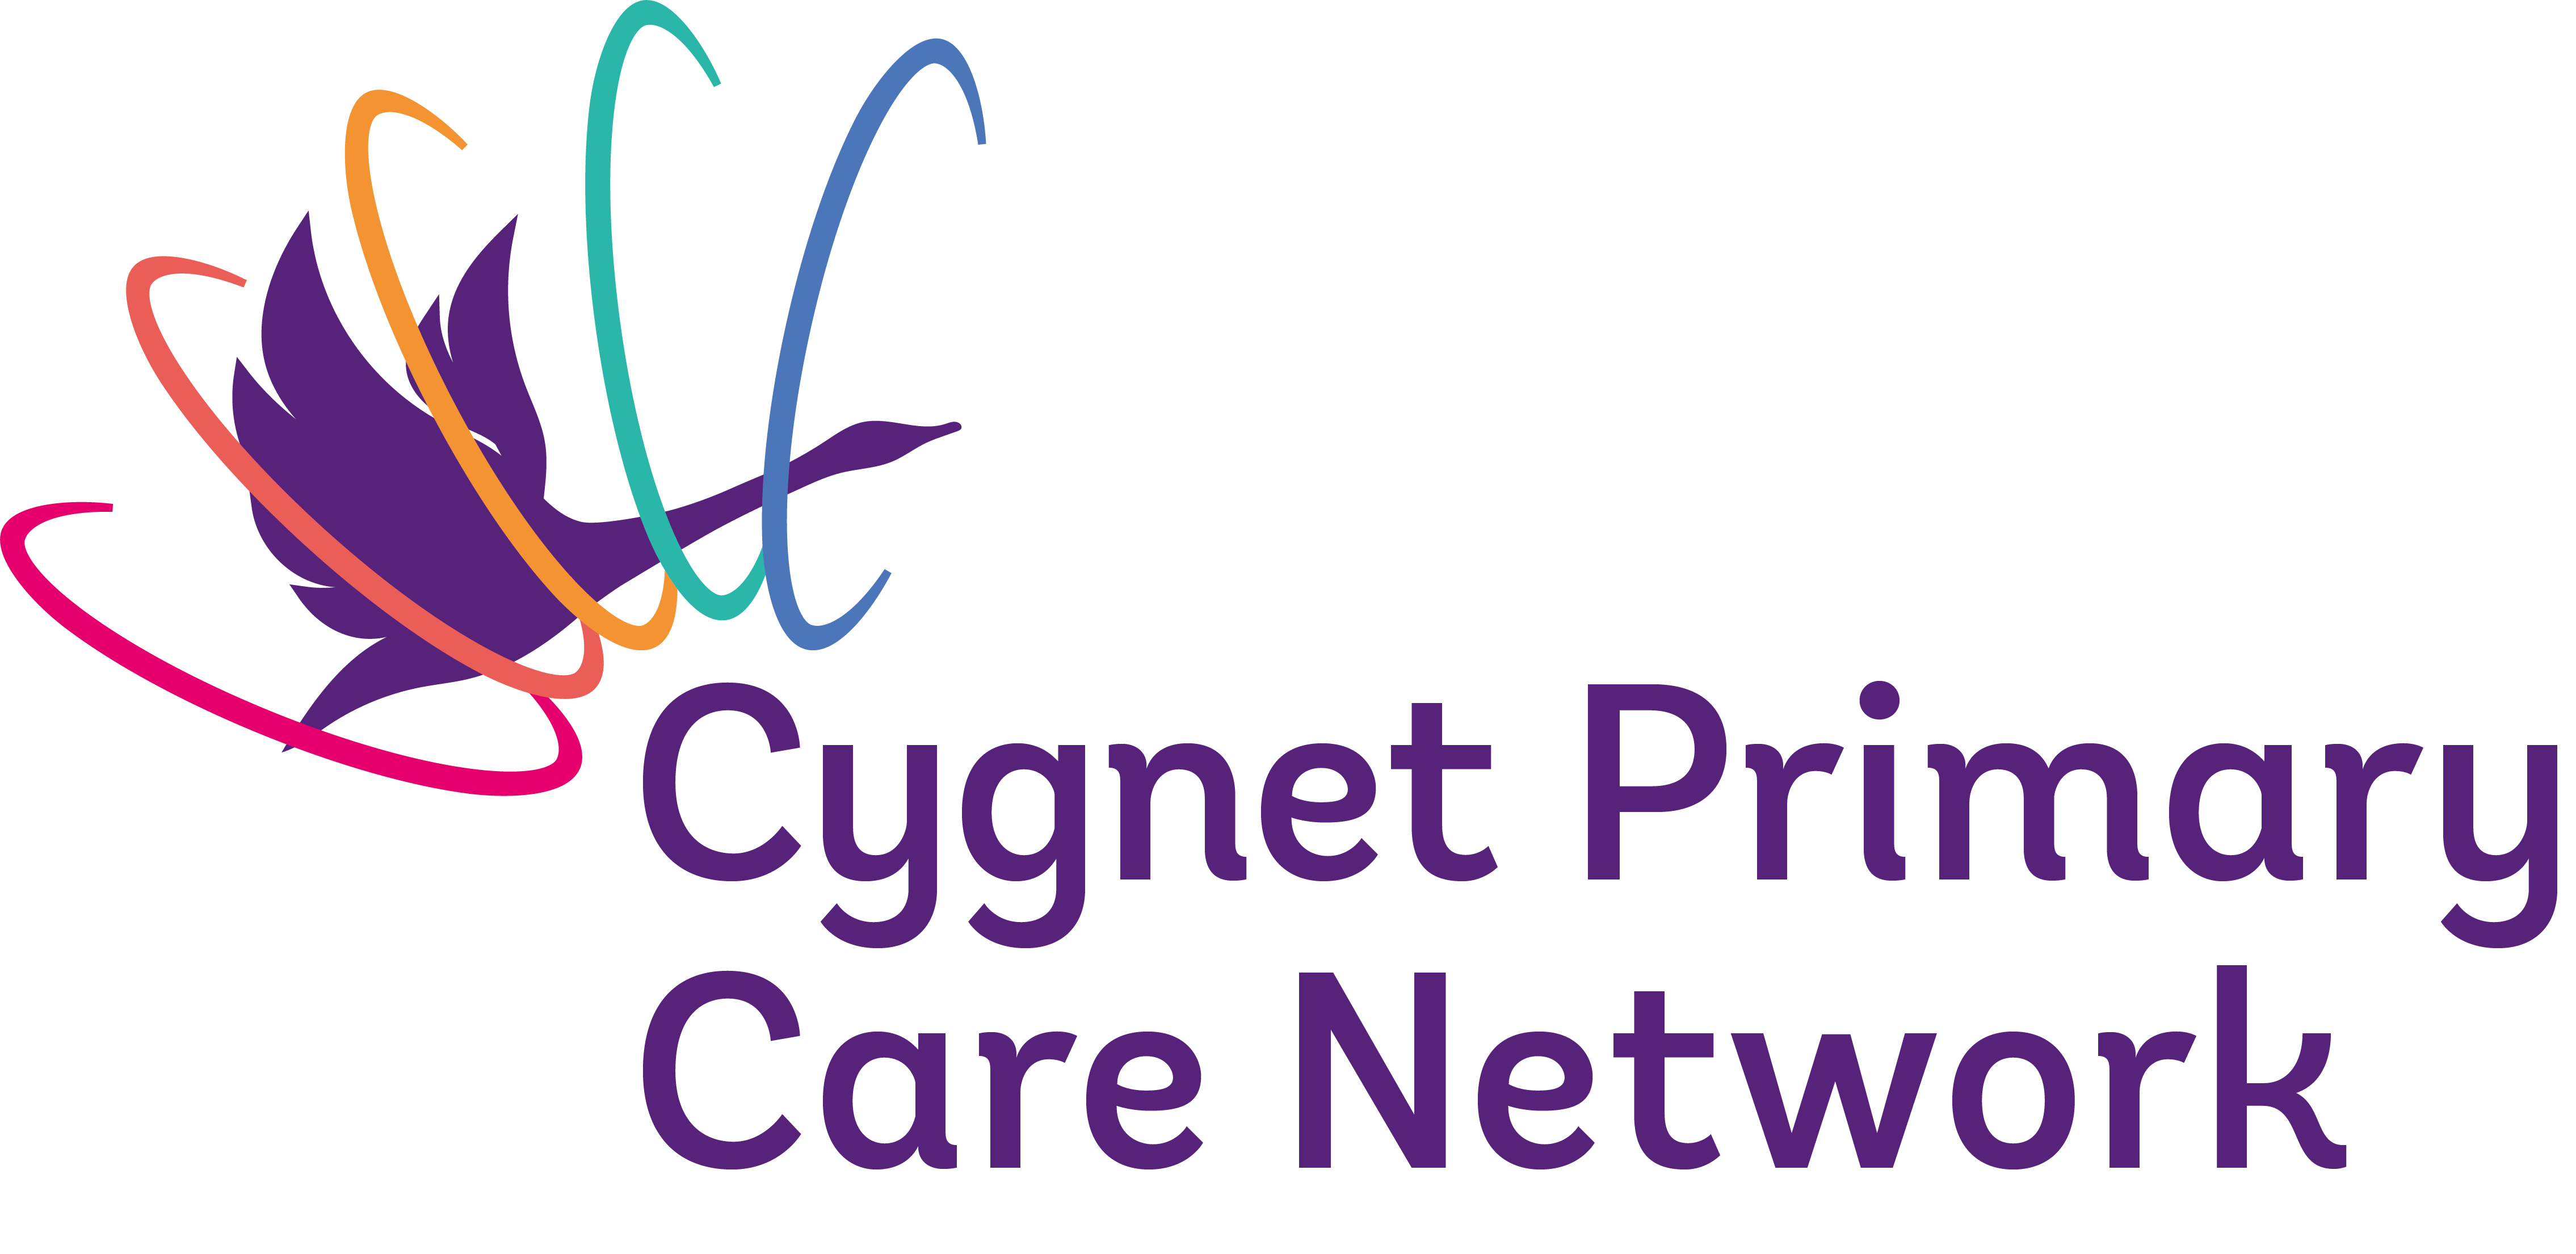 Cygnet Primary Care Network BS 5 